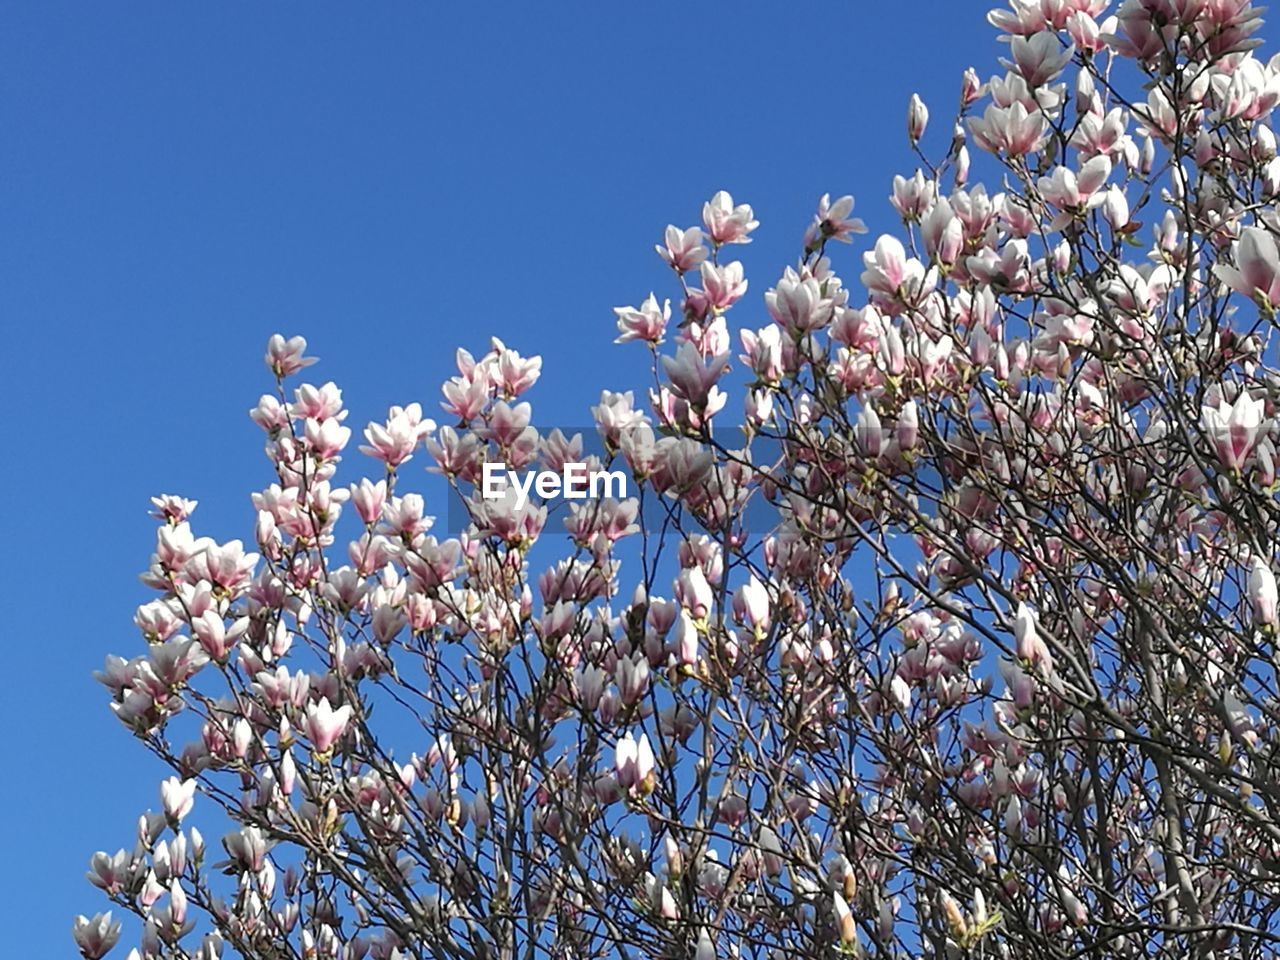 LOW ANGLE VIEW OF CHERRY BLOSSOM TREE AGAINST BLUE SKY